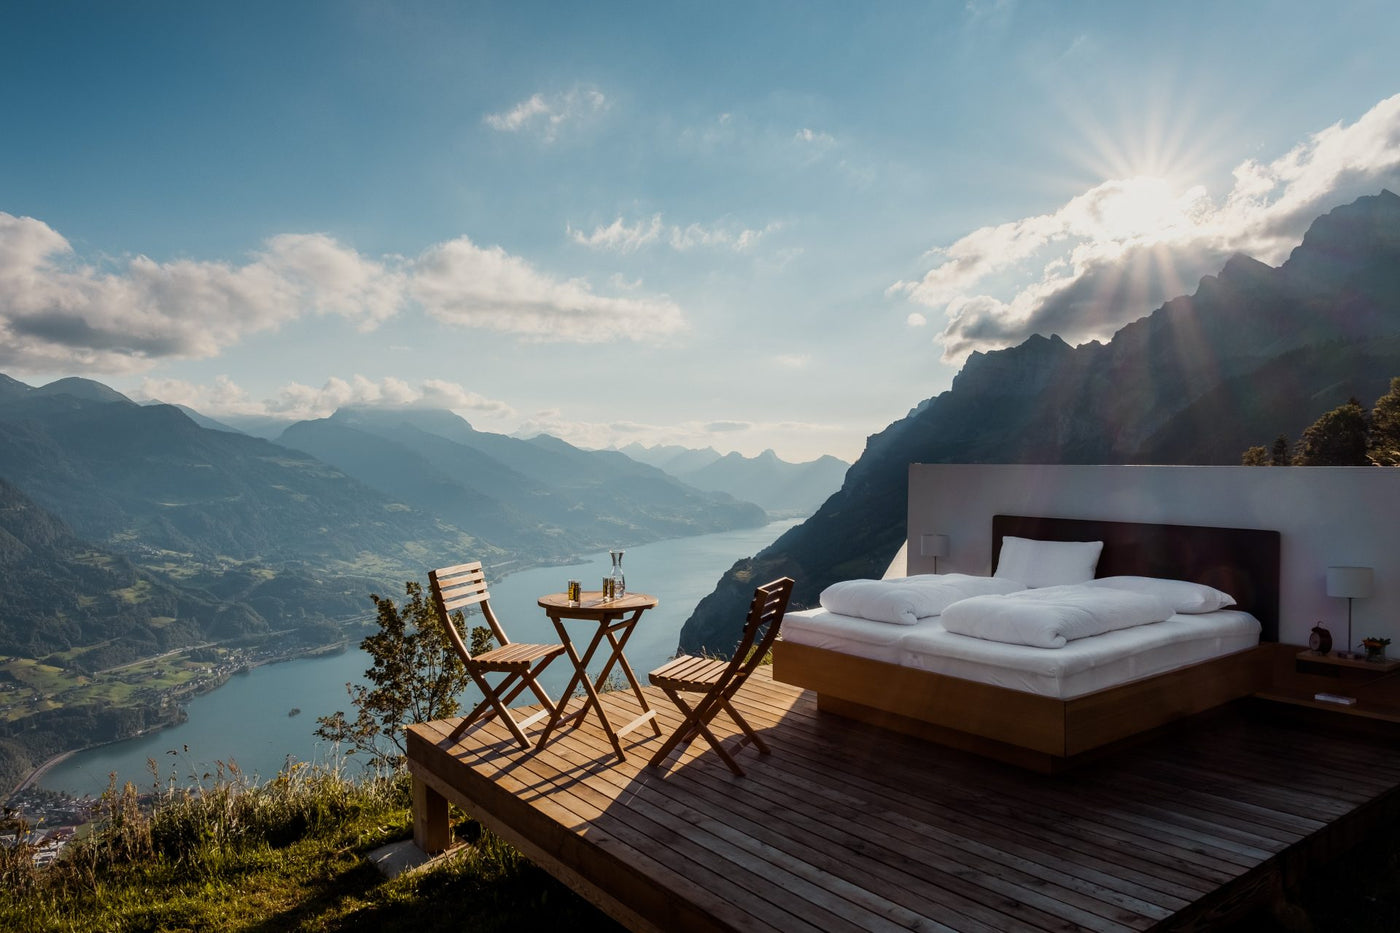 The Rise of Sleep Retreats and Our Top 3 Recommended Sleep Wellness Destinations